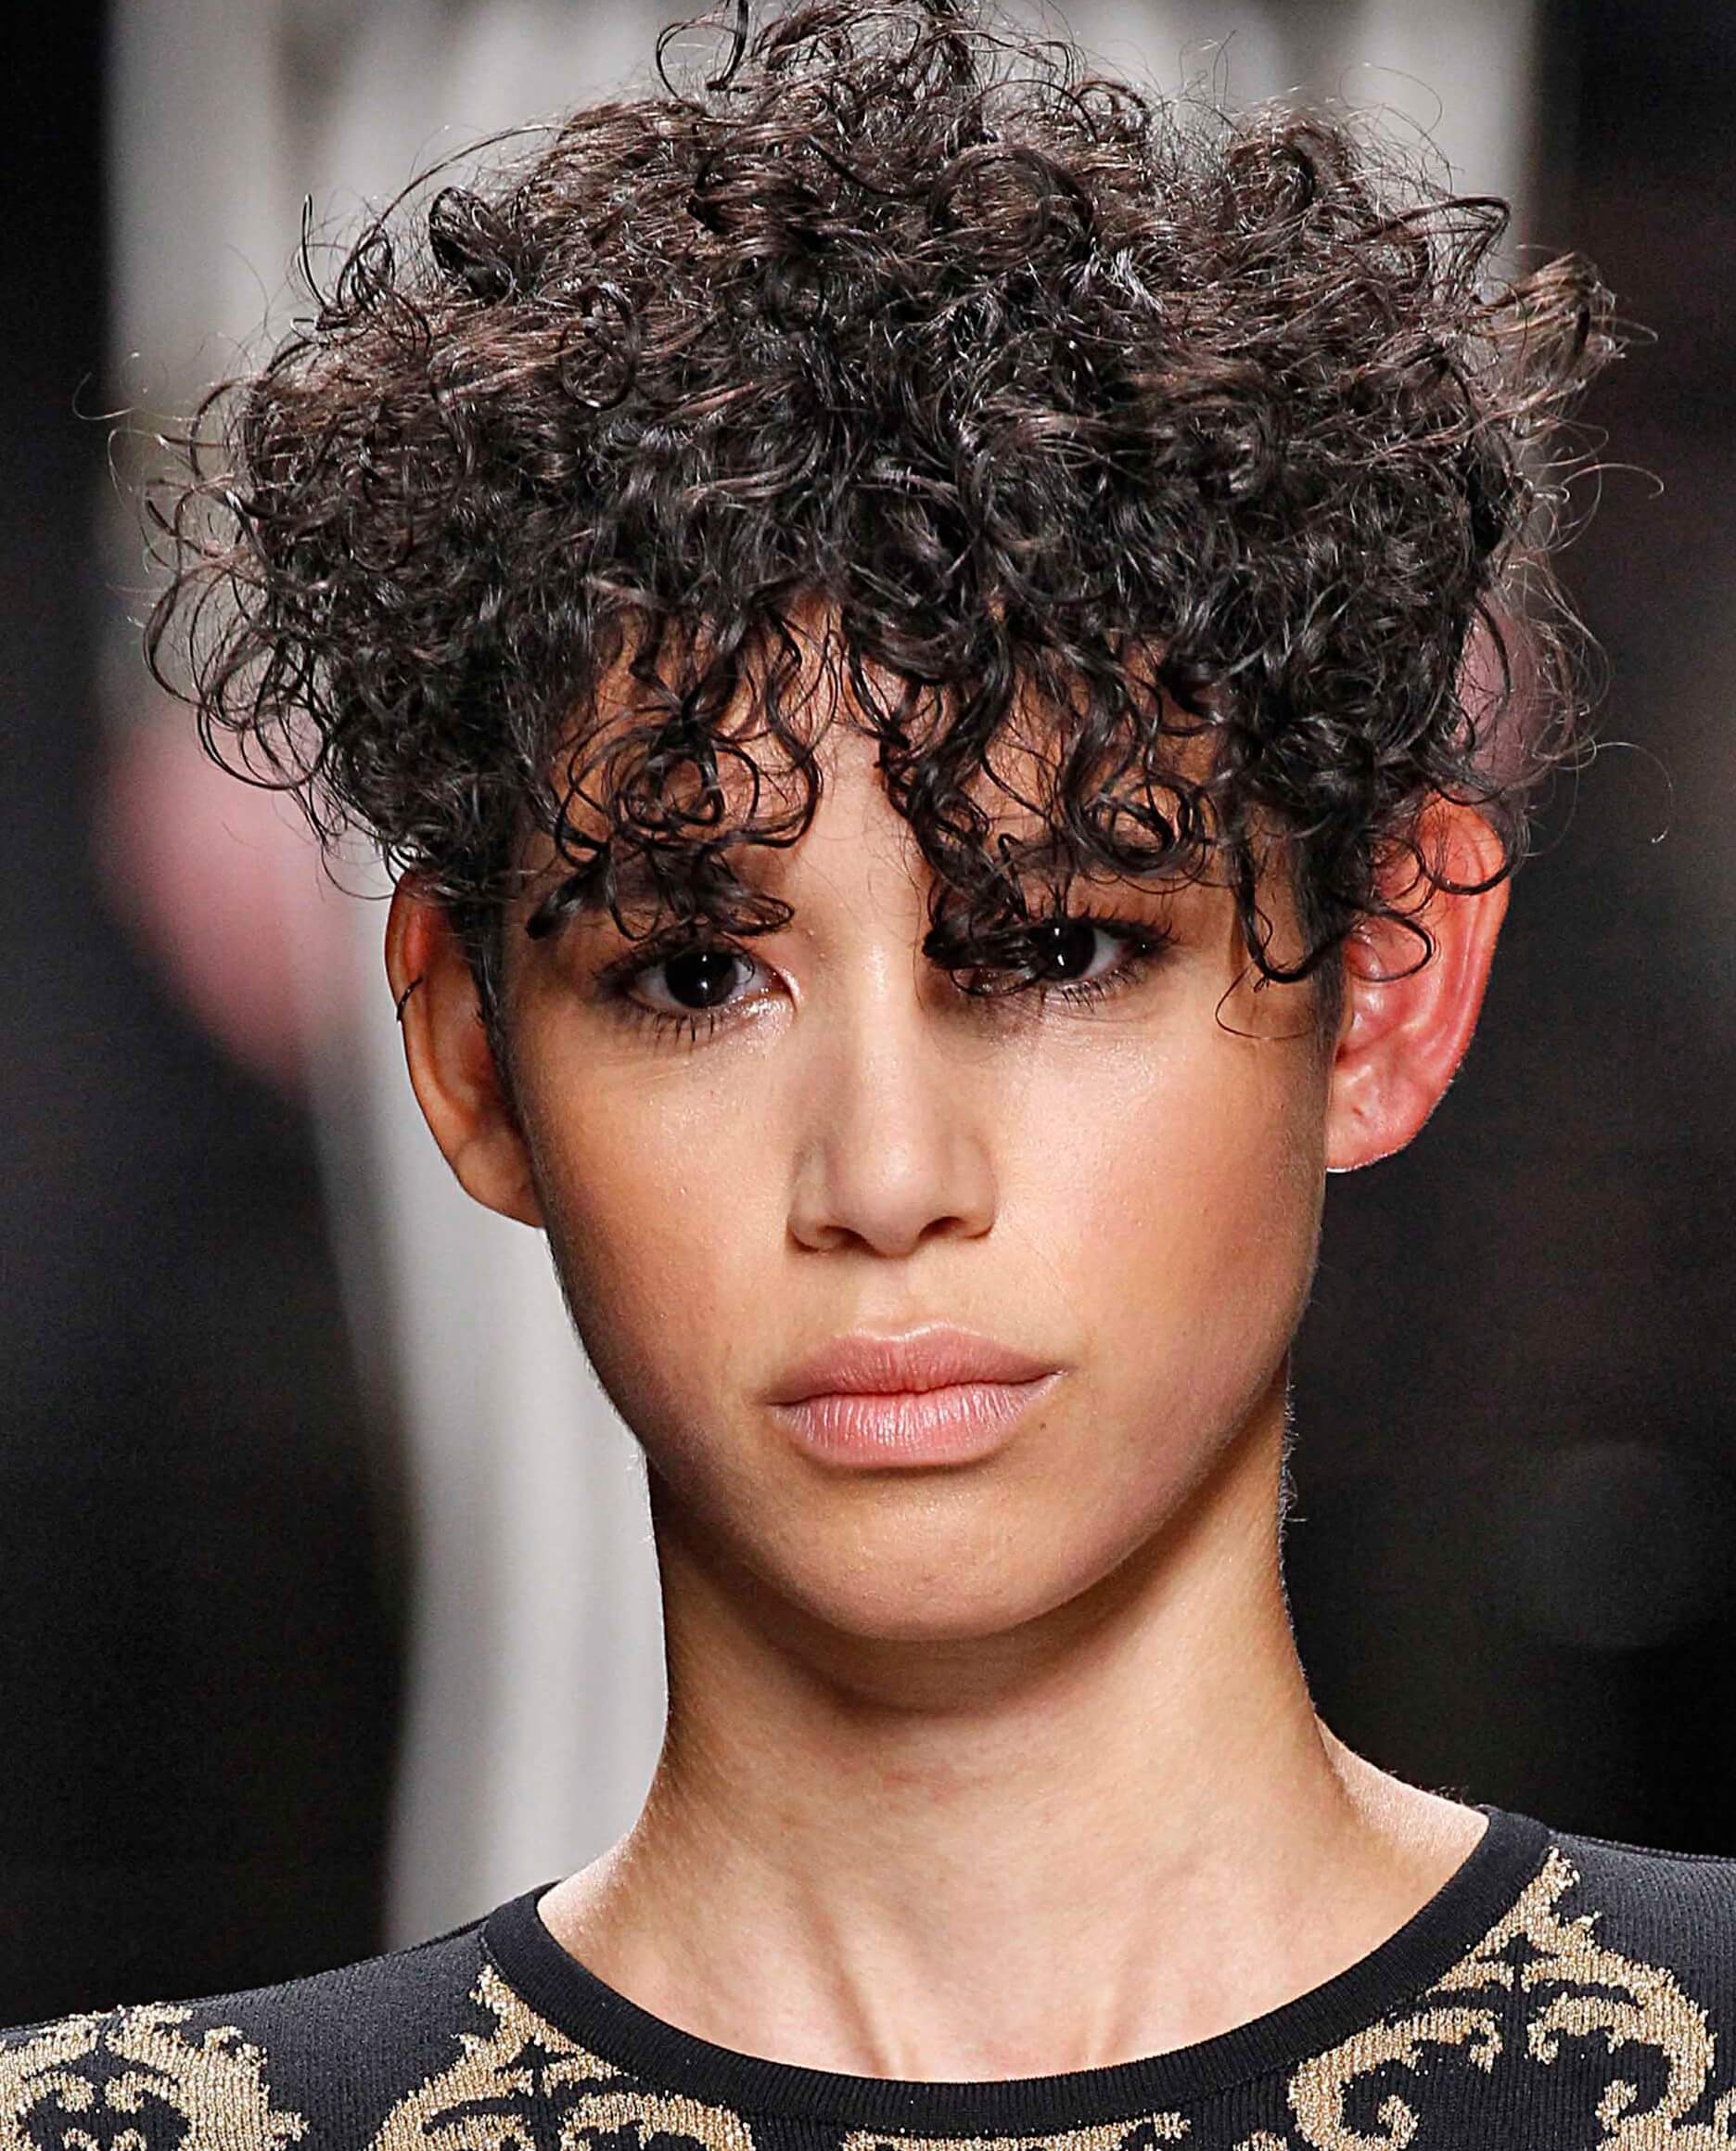 10 Best Hair Cuts For Curly Hair - Toni&guy